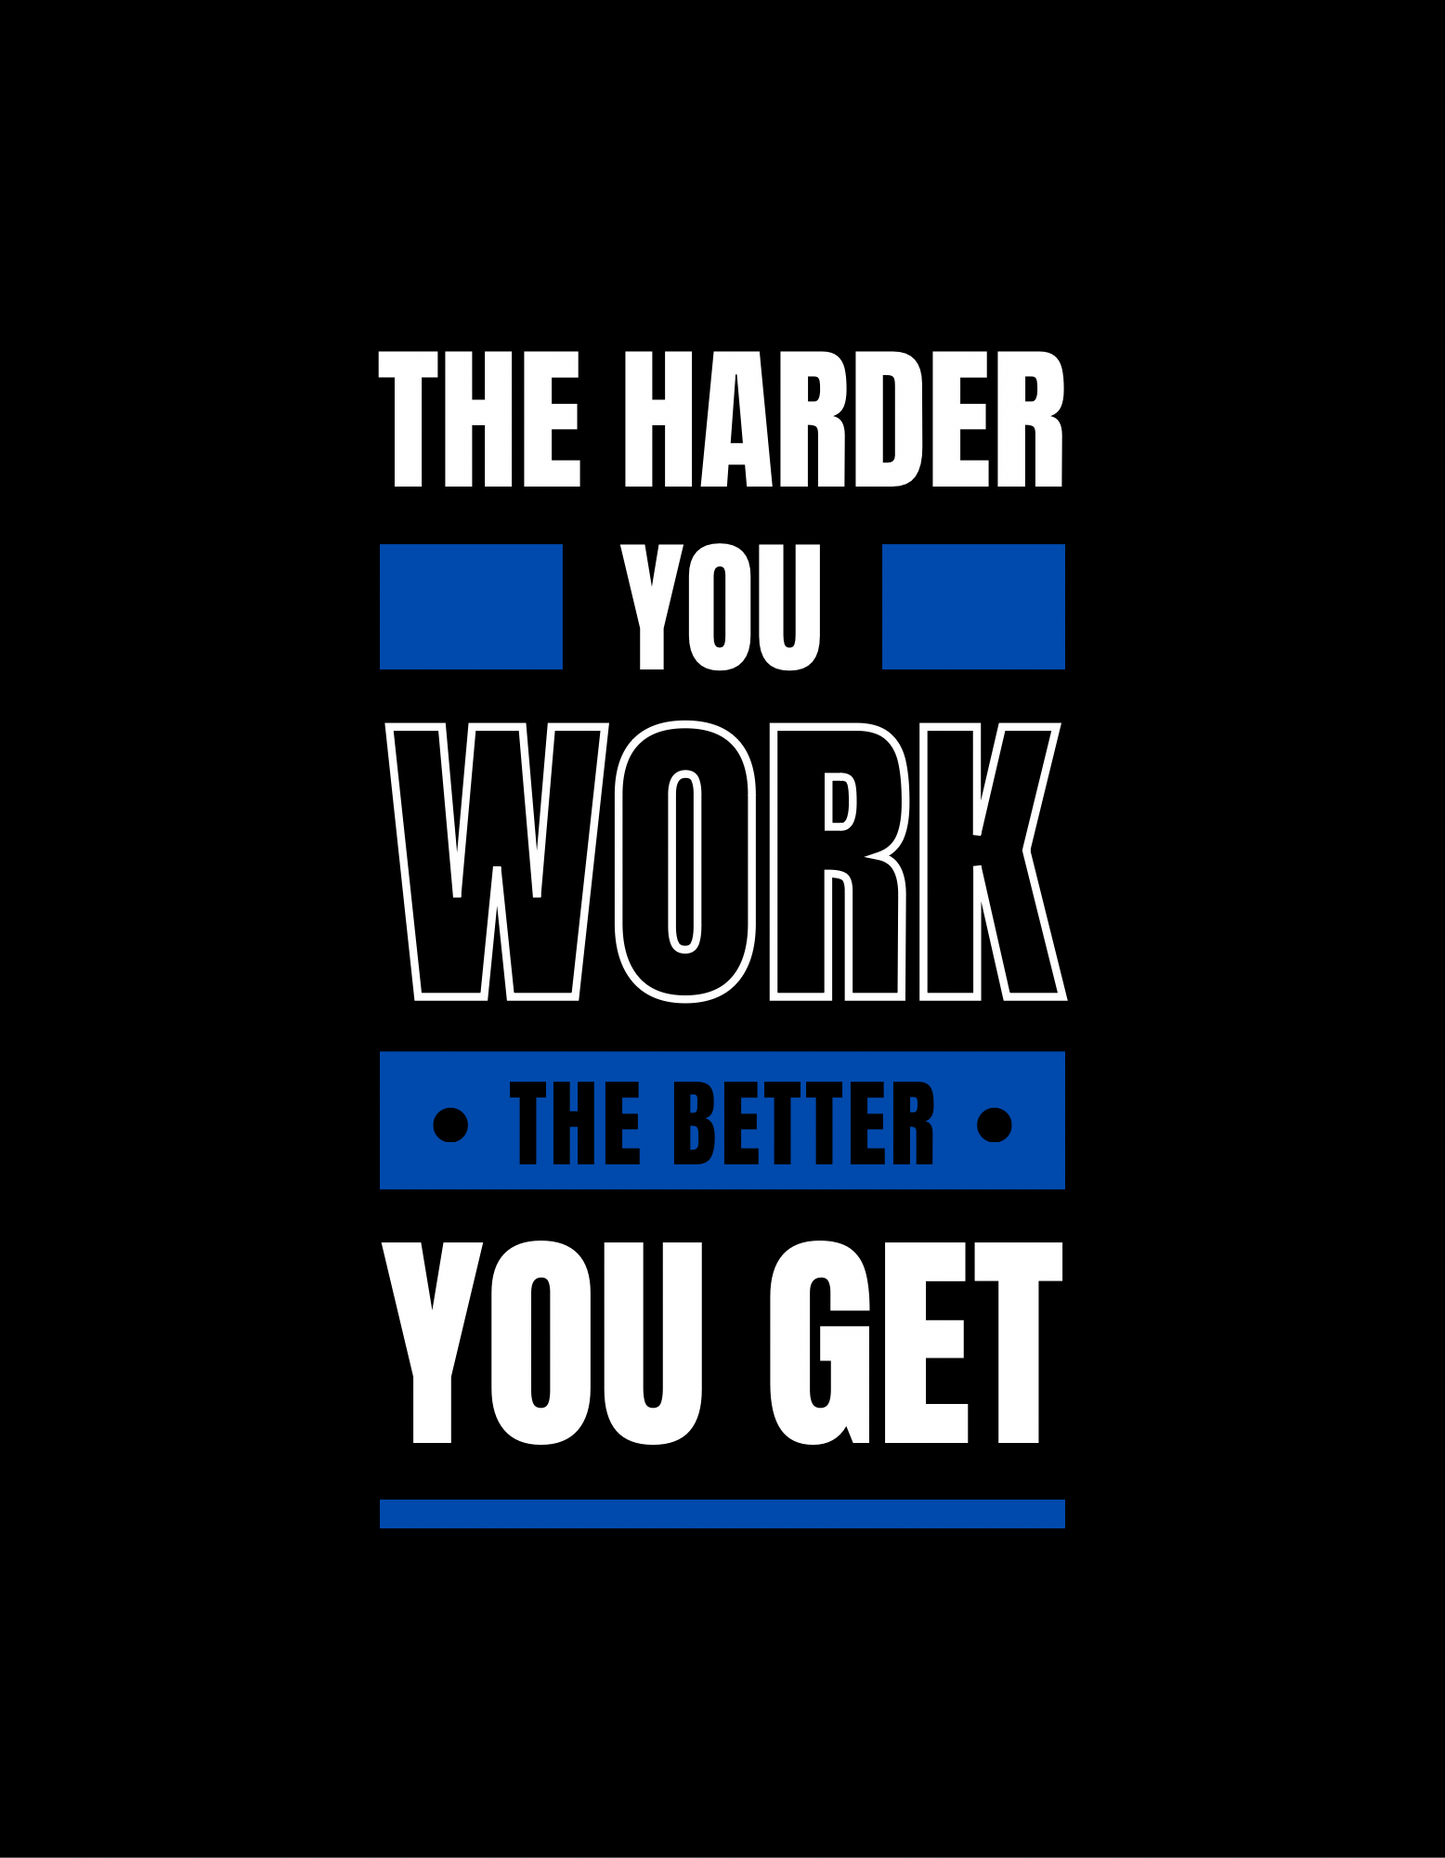 The harder you work the better you get